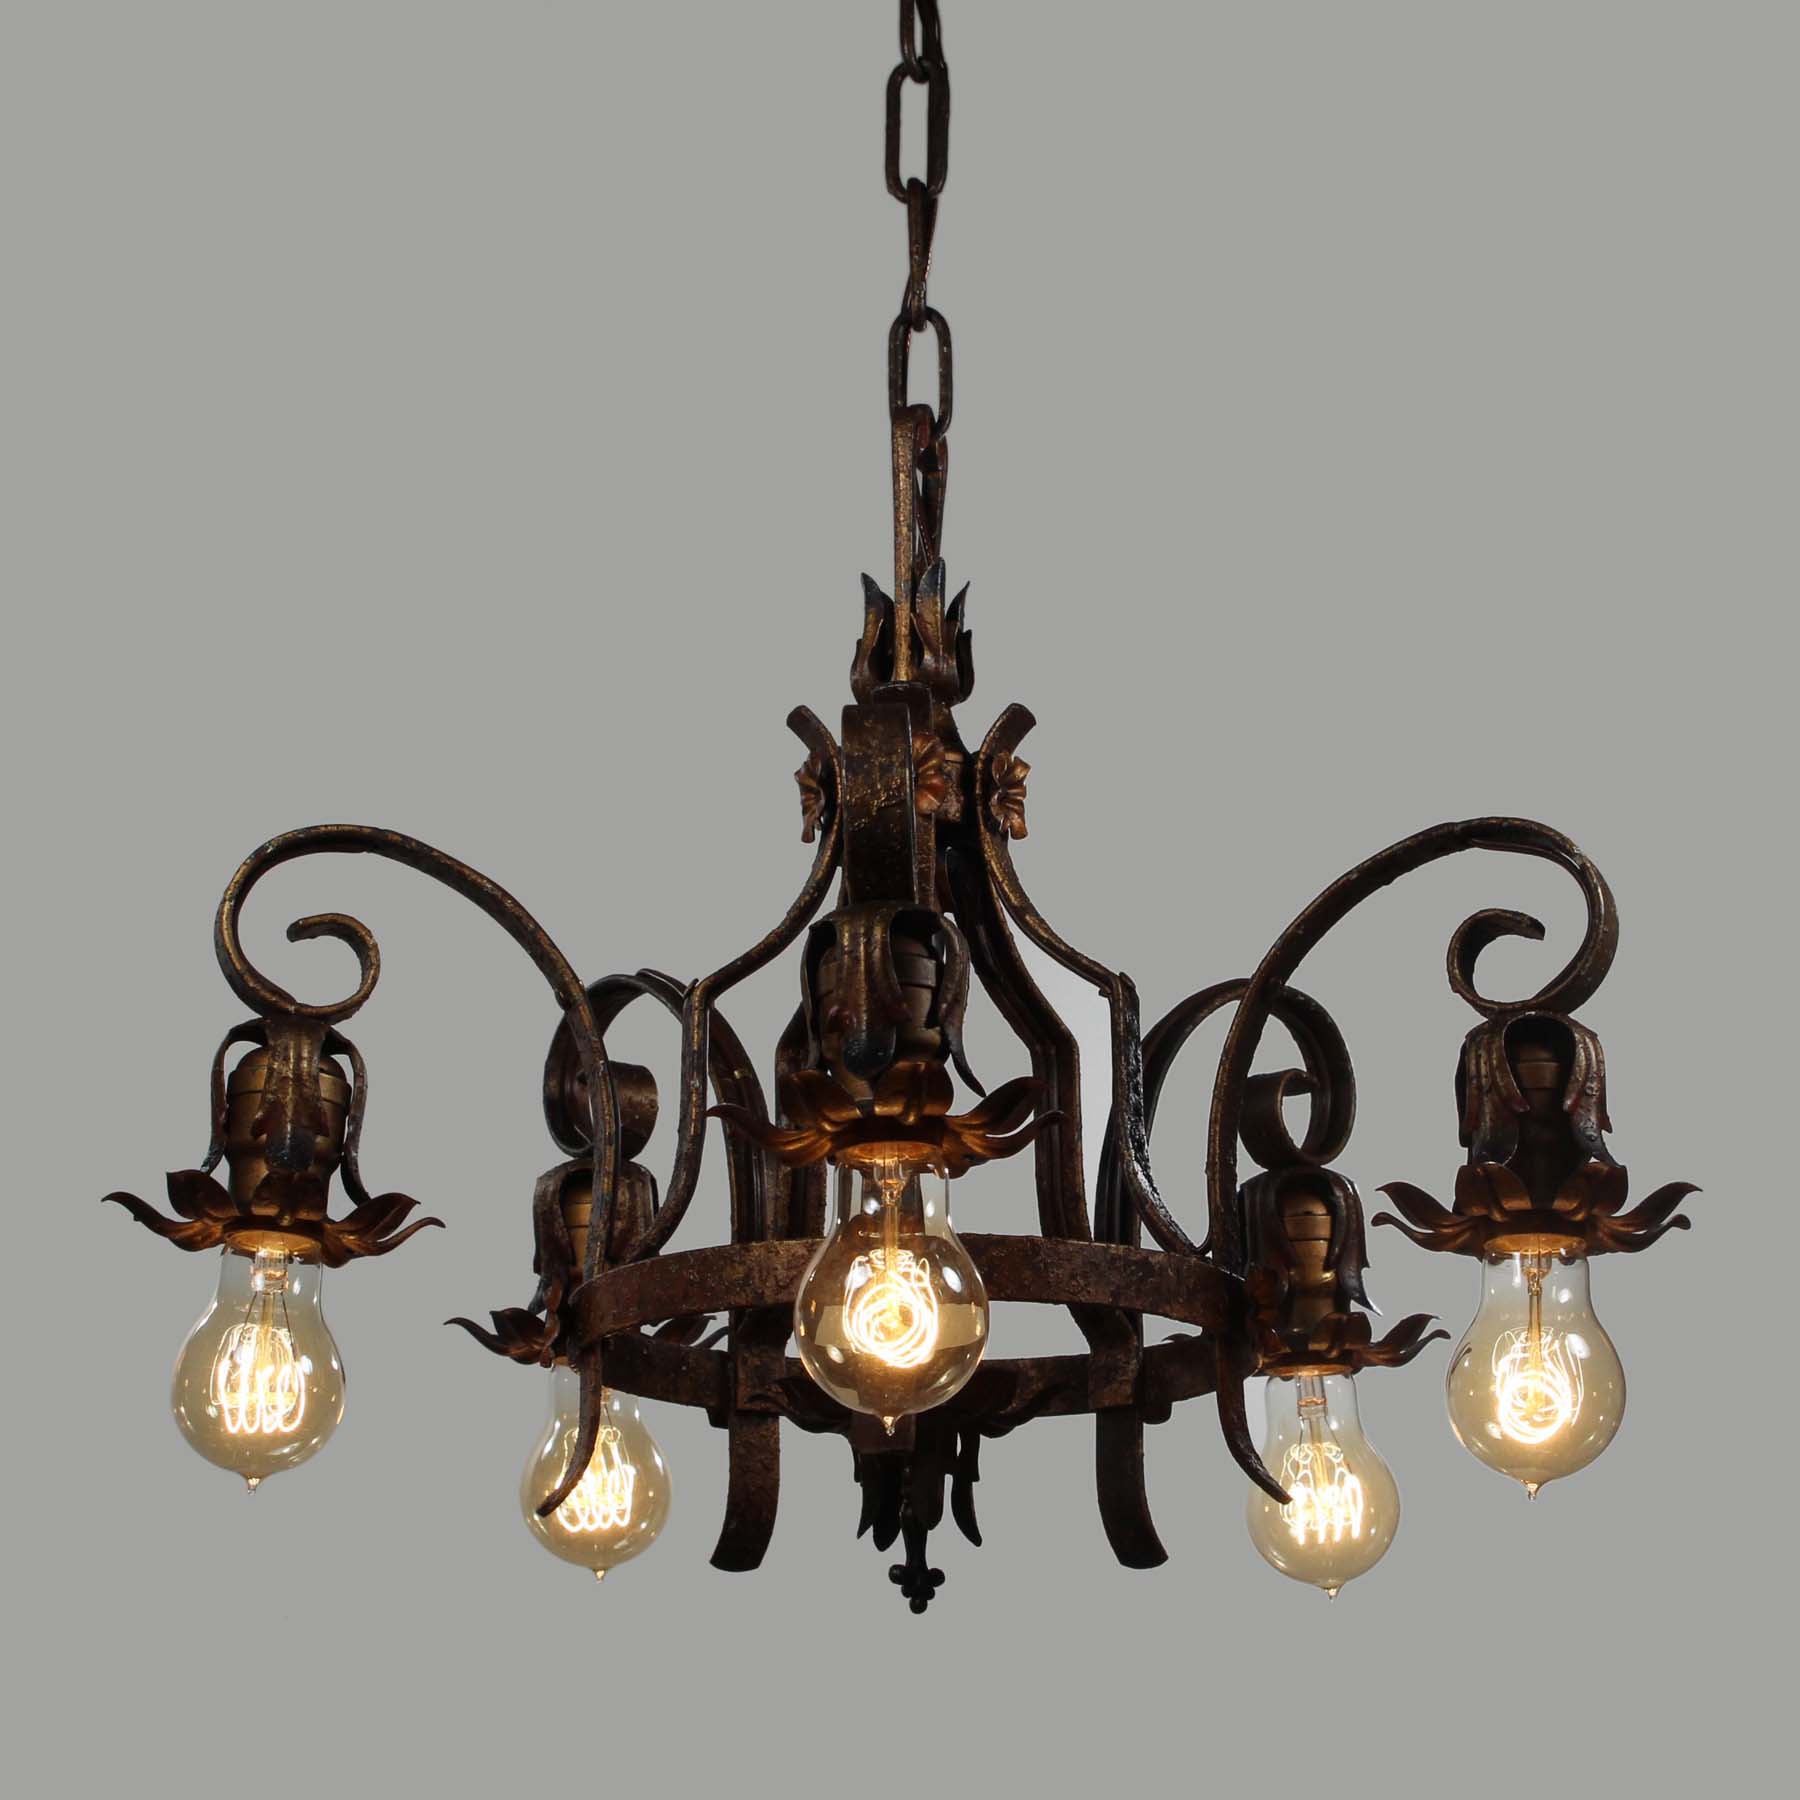 SOLD Antique Five-Light Iron Chandelier with Flowers, c. 1920s -70663